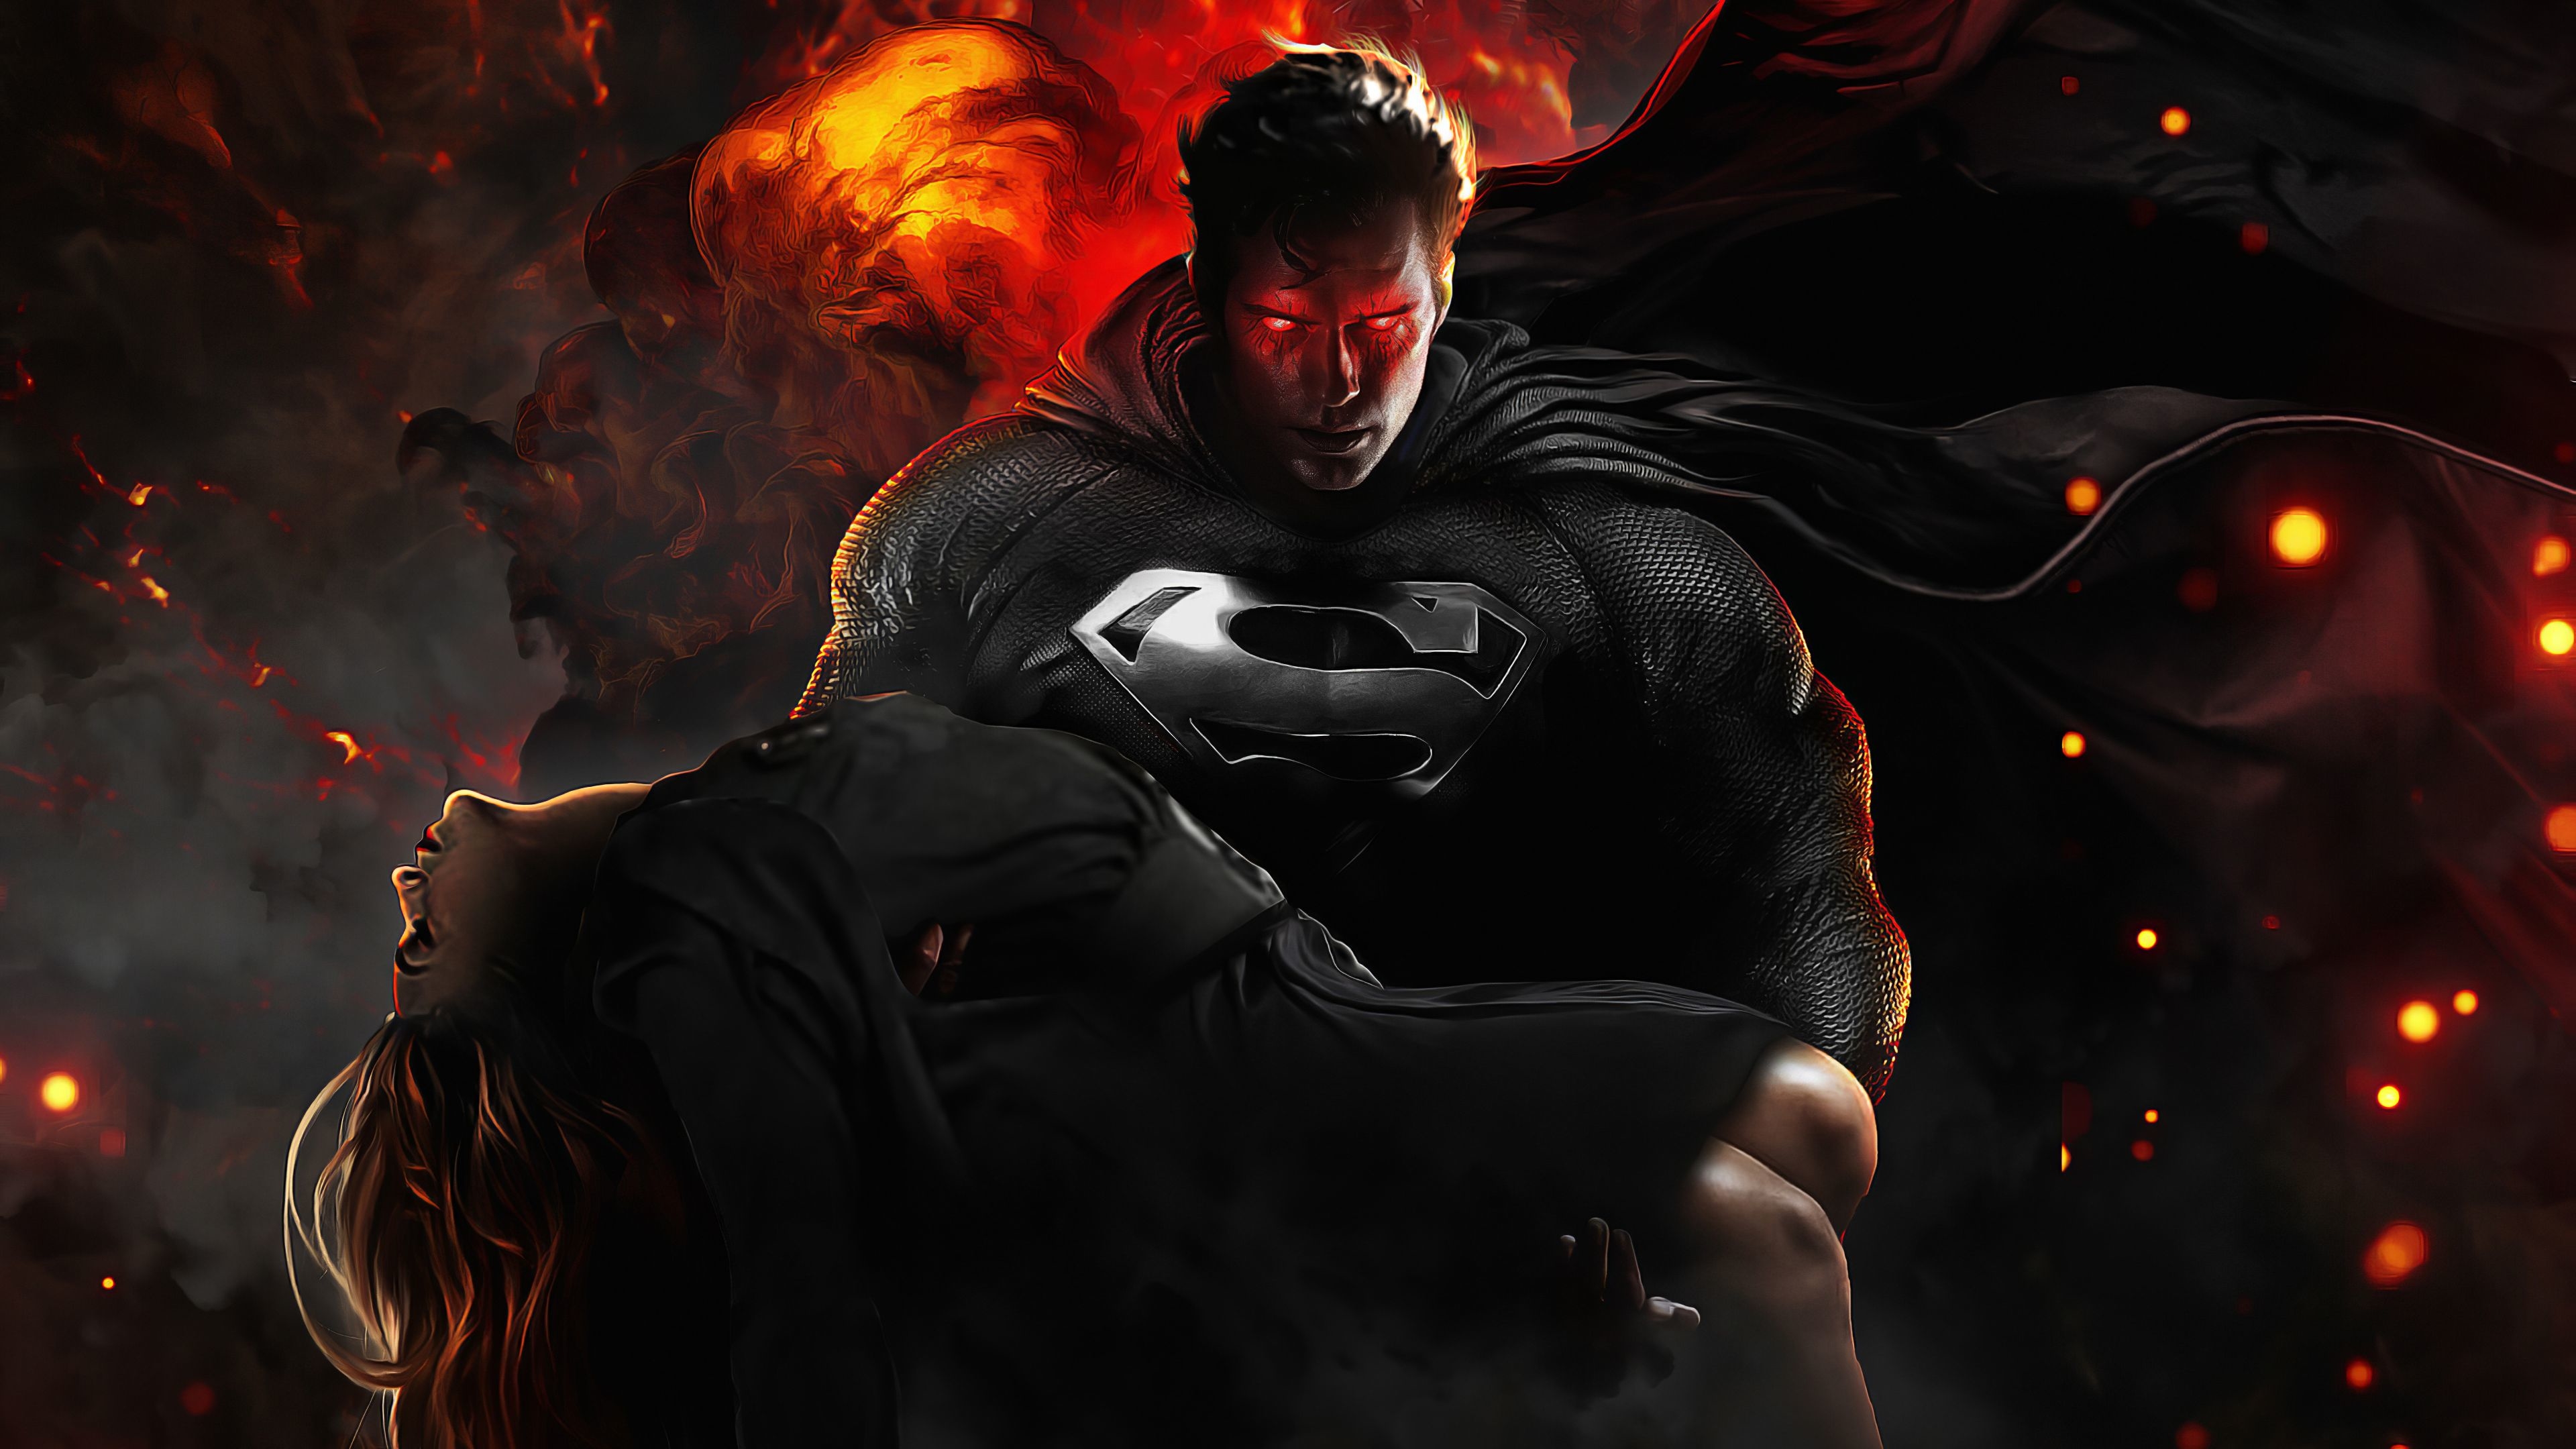 1440x2561 Resolution Superman Zack Snyder's Justice League 1440x2561 ...